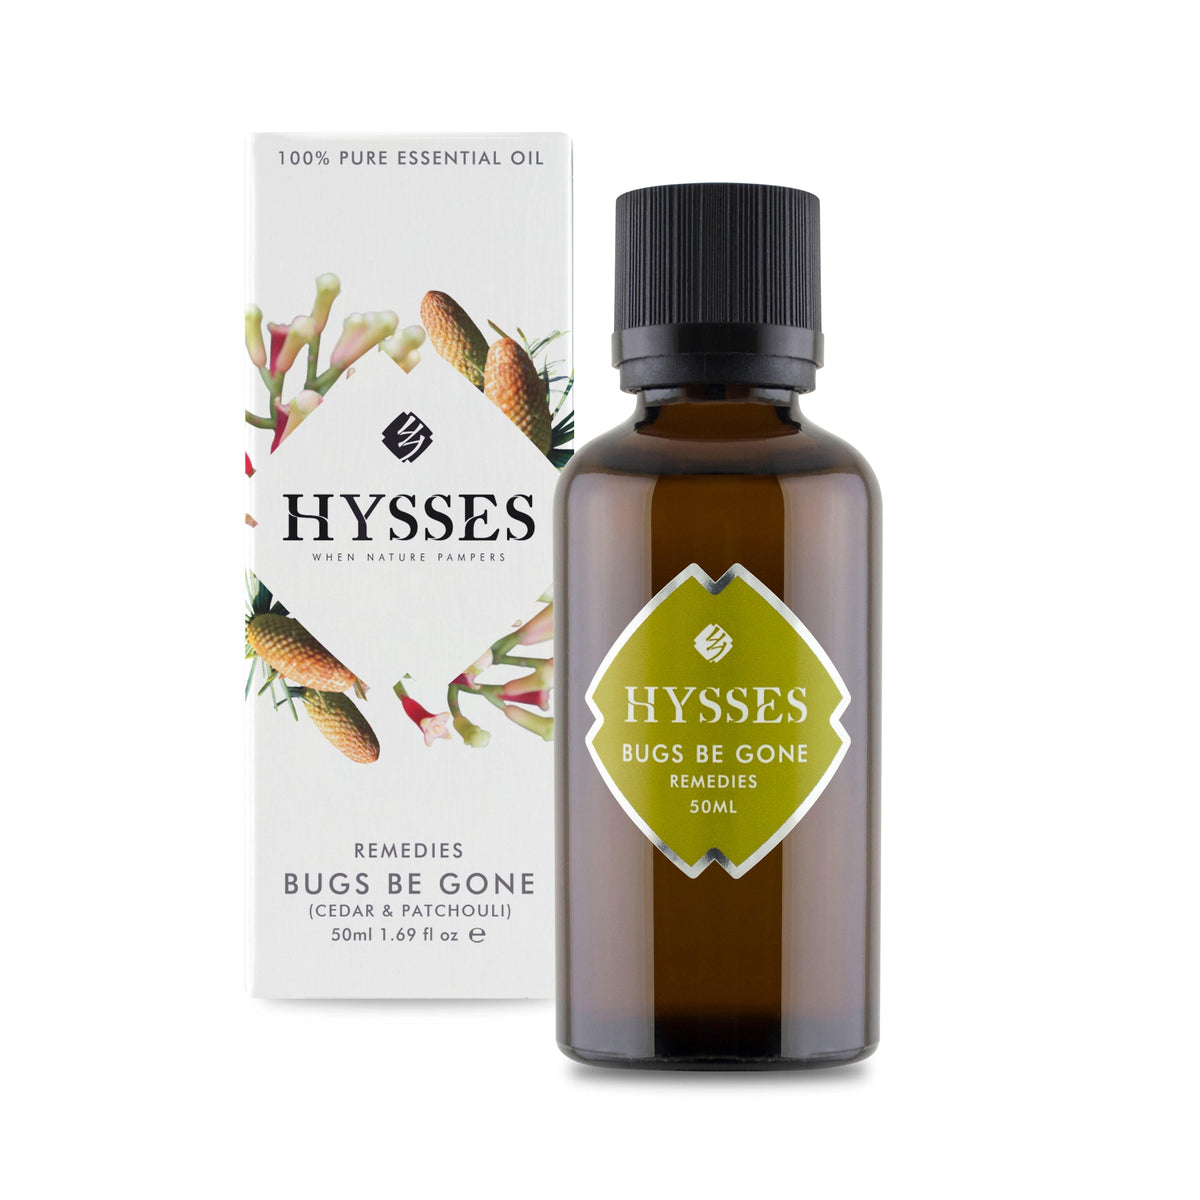 Hysses Essential Oil Remedies, Bugs Be Gone